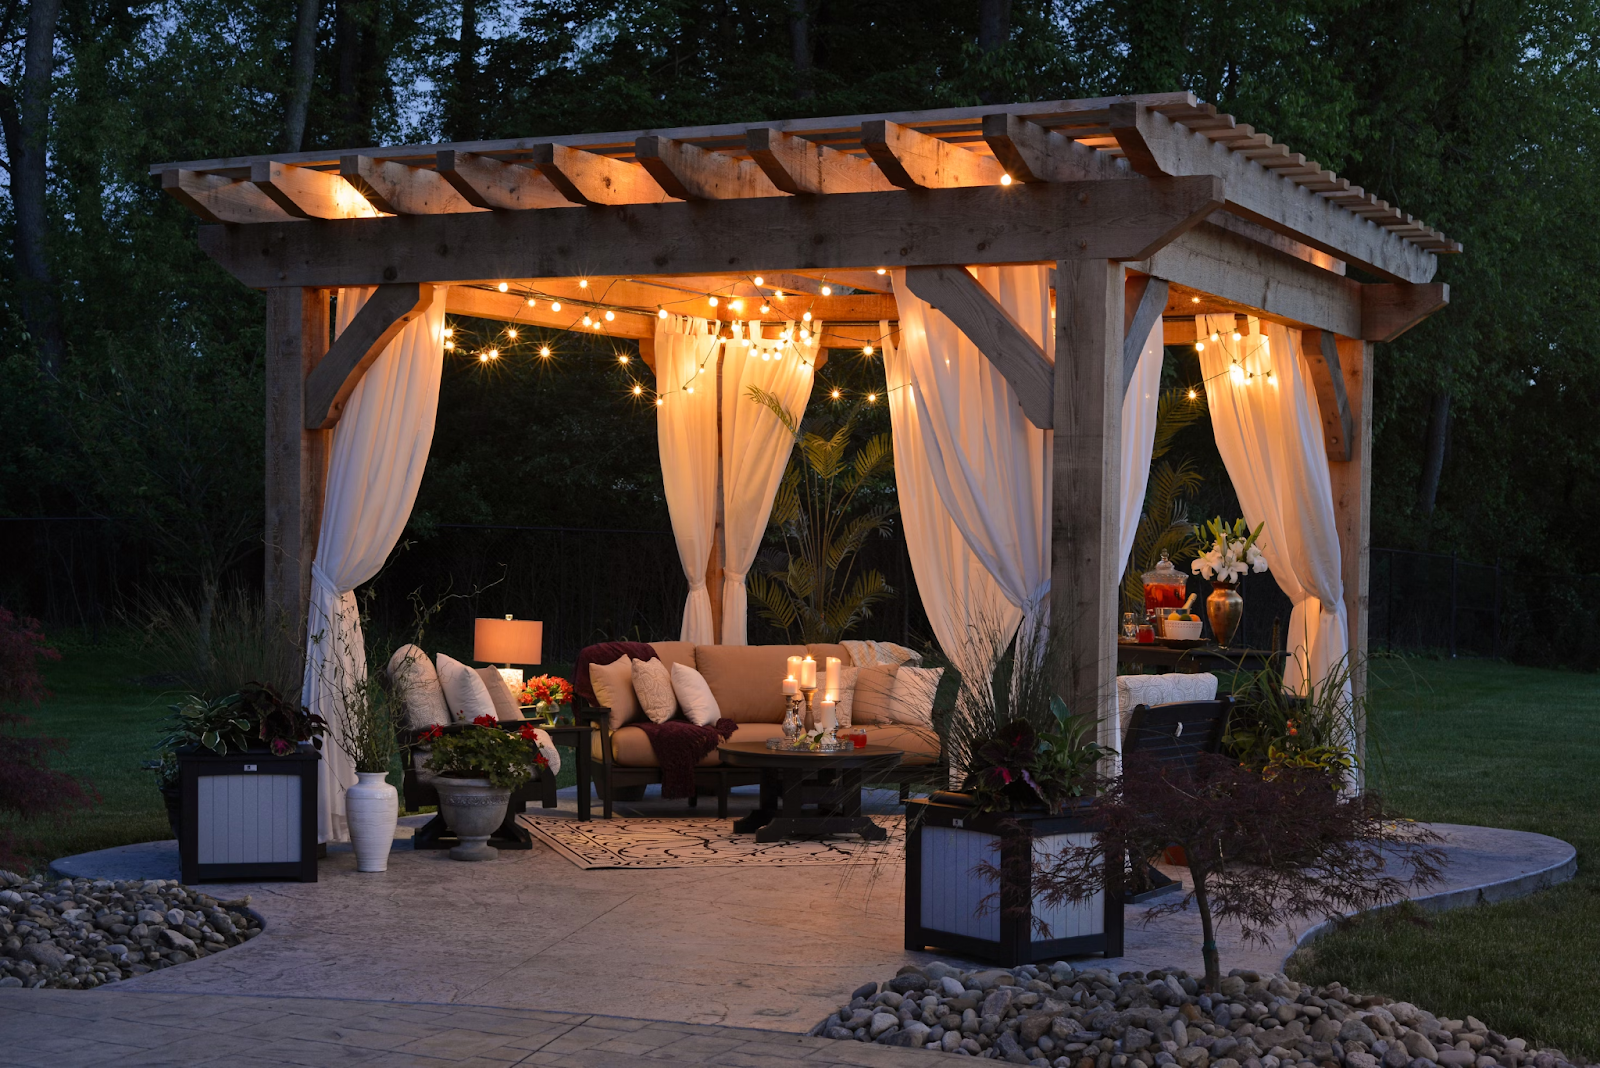 patio in backyard with pergola, dangling lights, and outdoor furniture